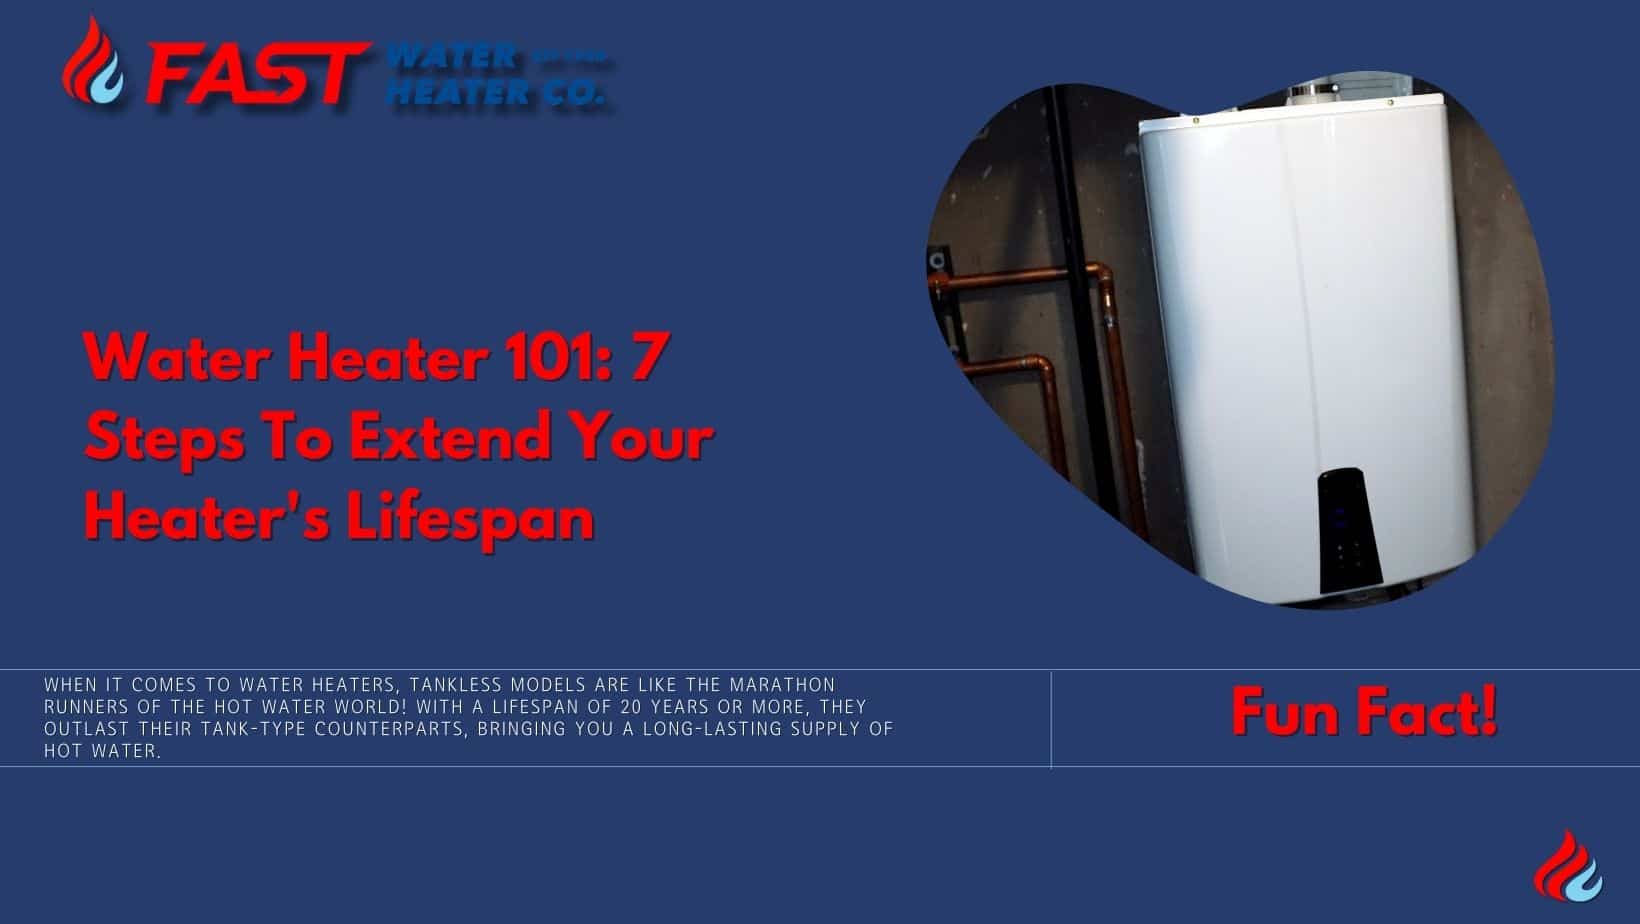 Water Heater 101: 7 Steps To Extend Your Heater's Lifespan